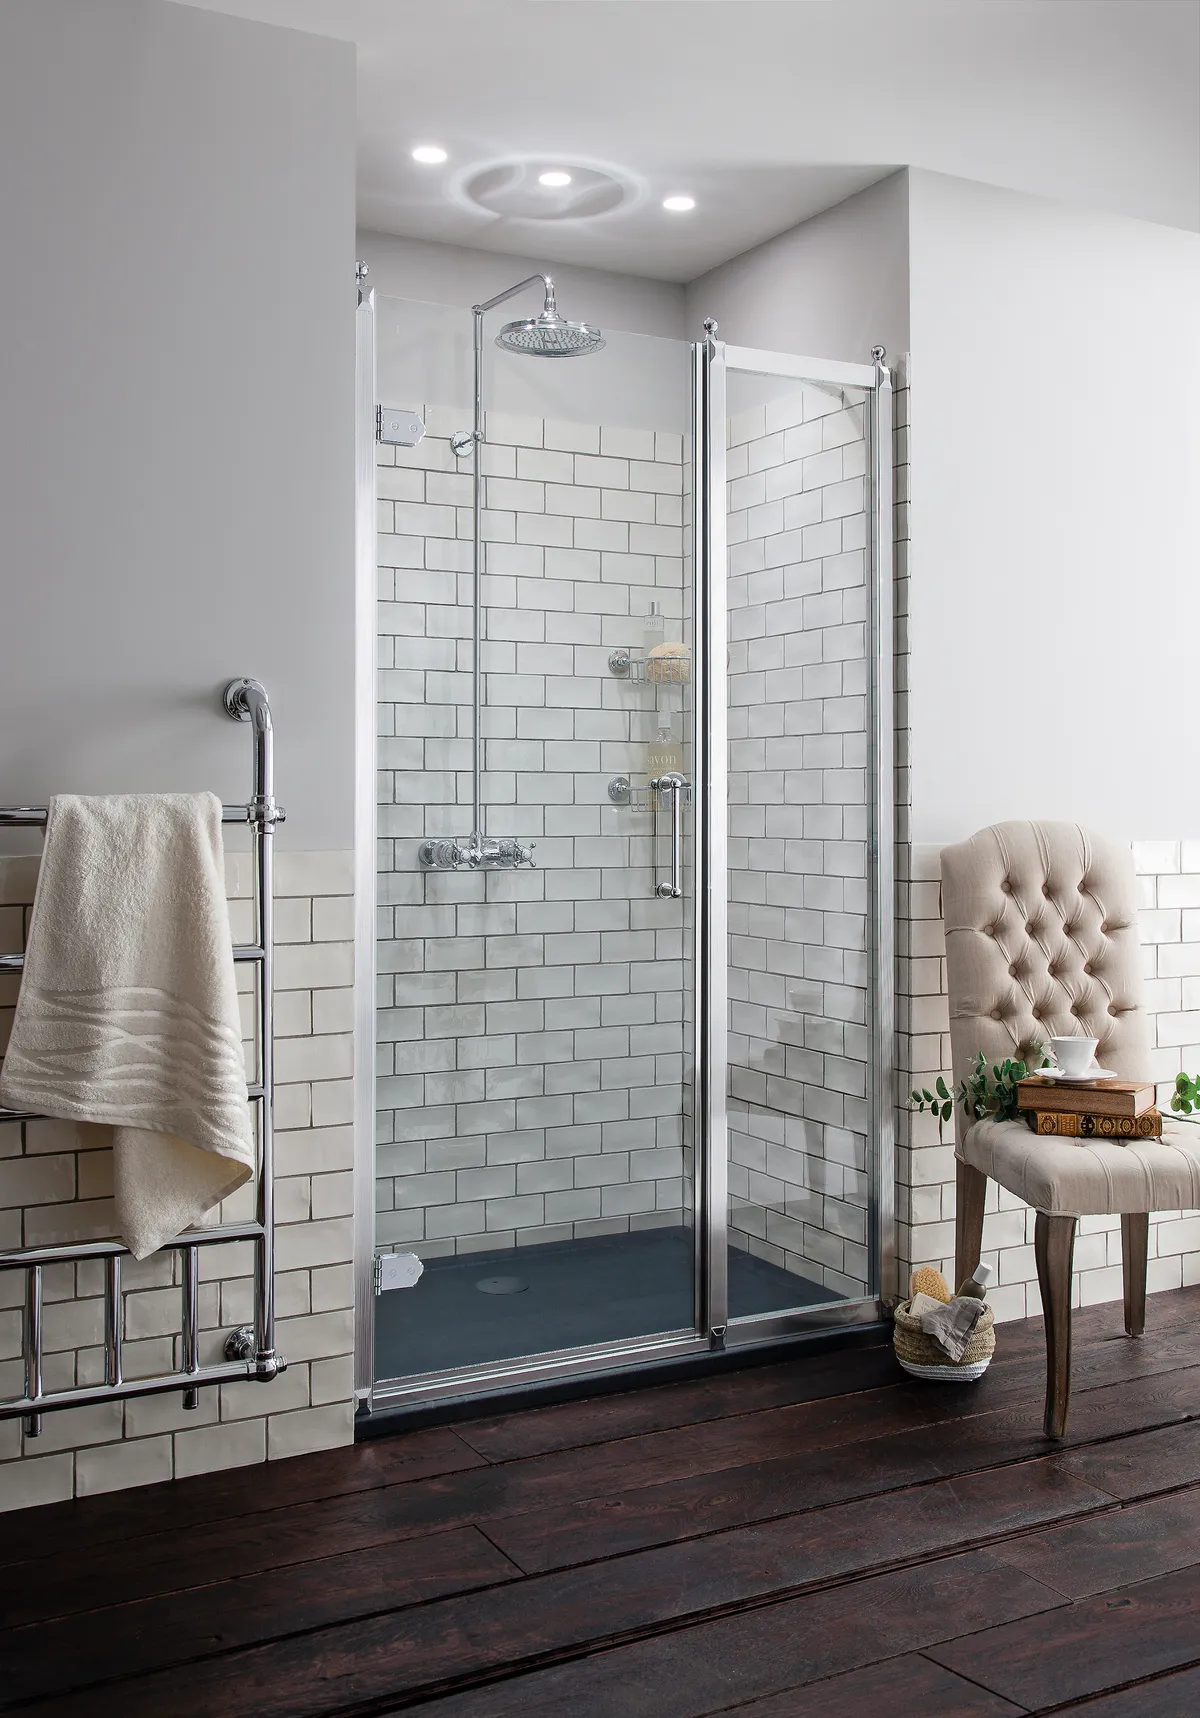 A glass shower enclosure with white metro tiles